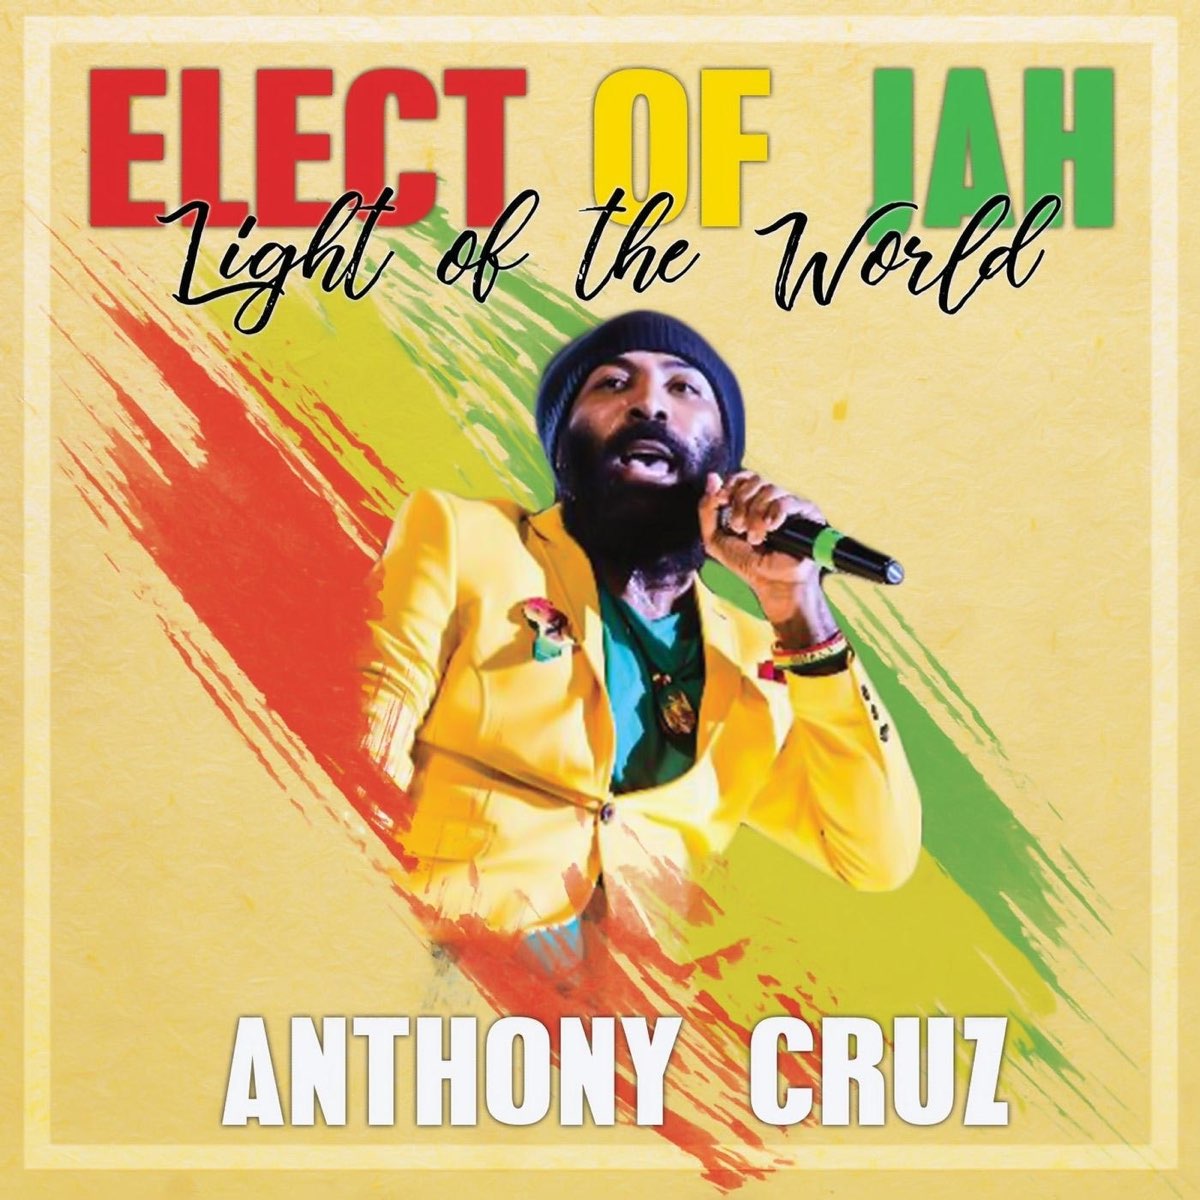 Elect of Jah: Light of the World by Anthony Cruz on Apple Music